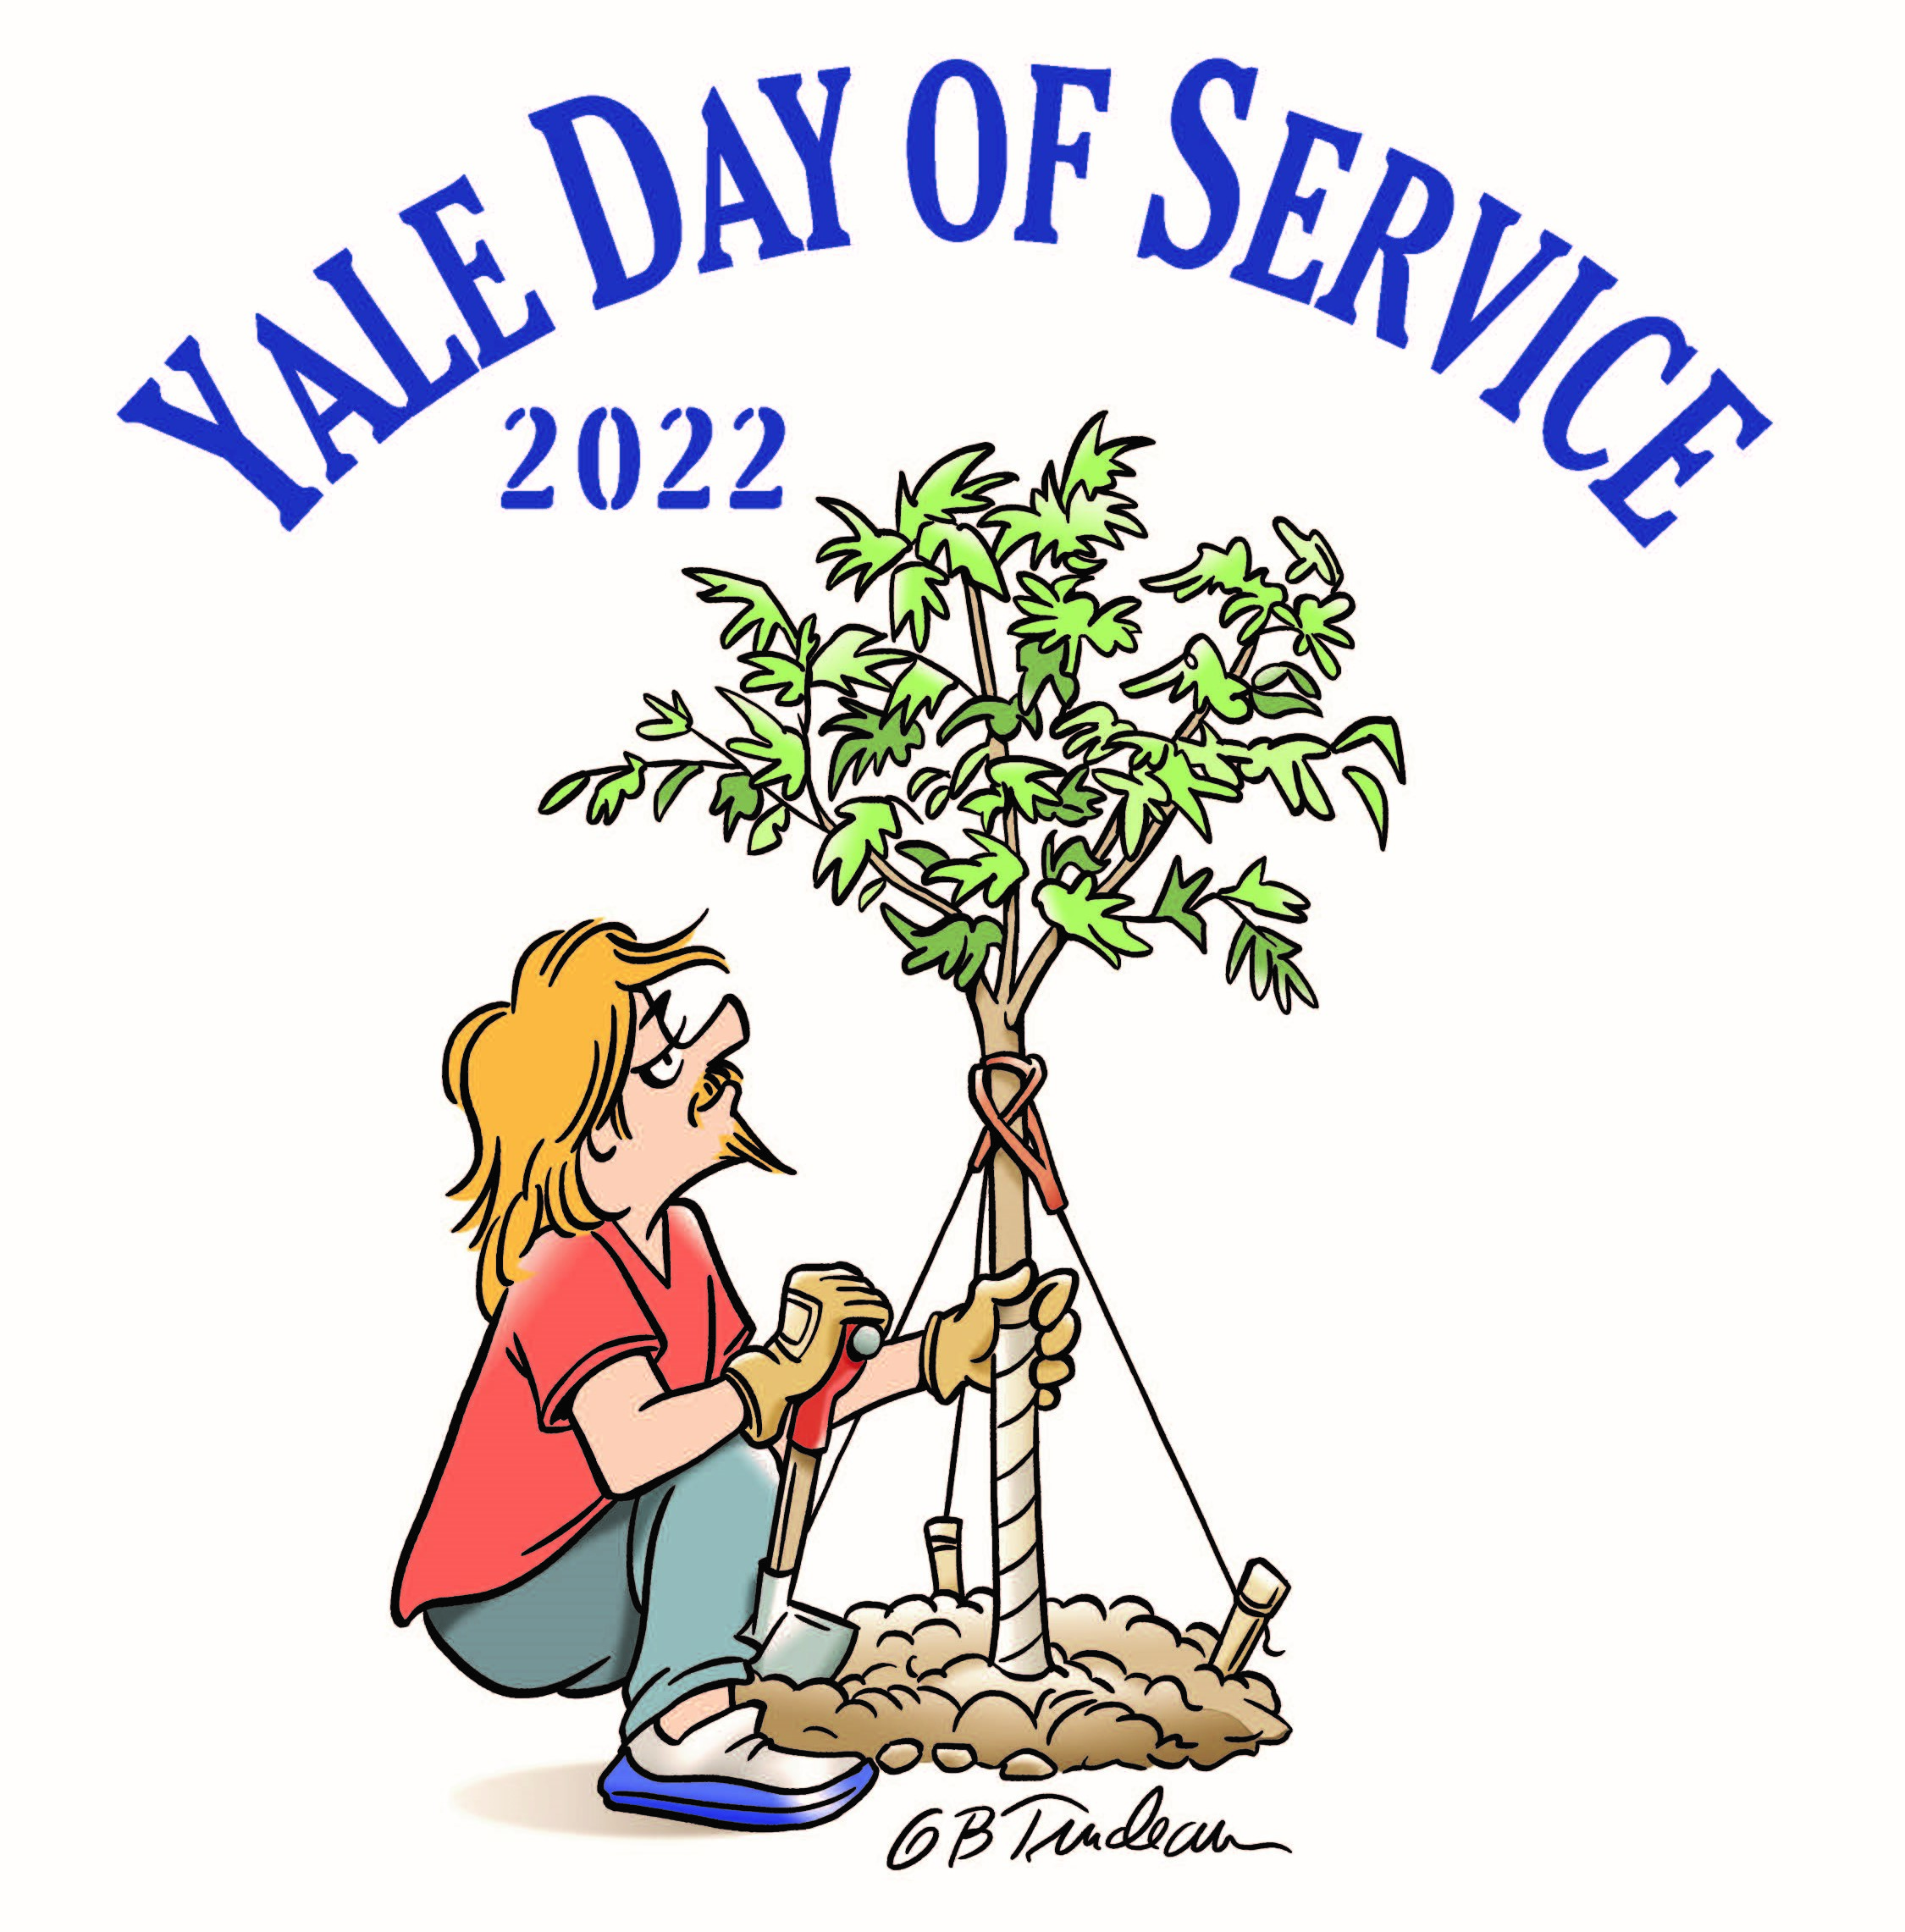 Yale Day of Service Garry Trudeau illustration 